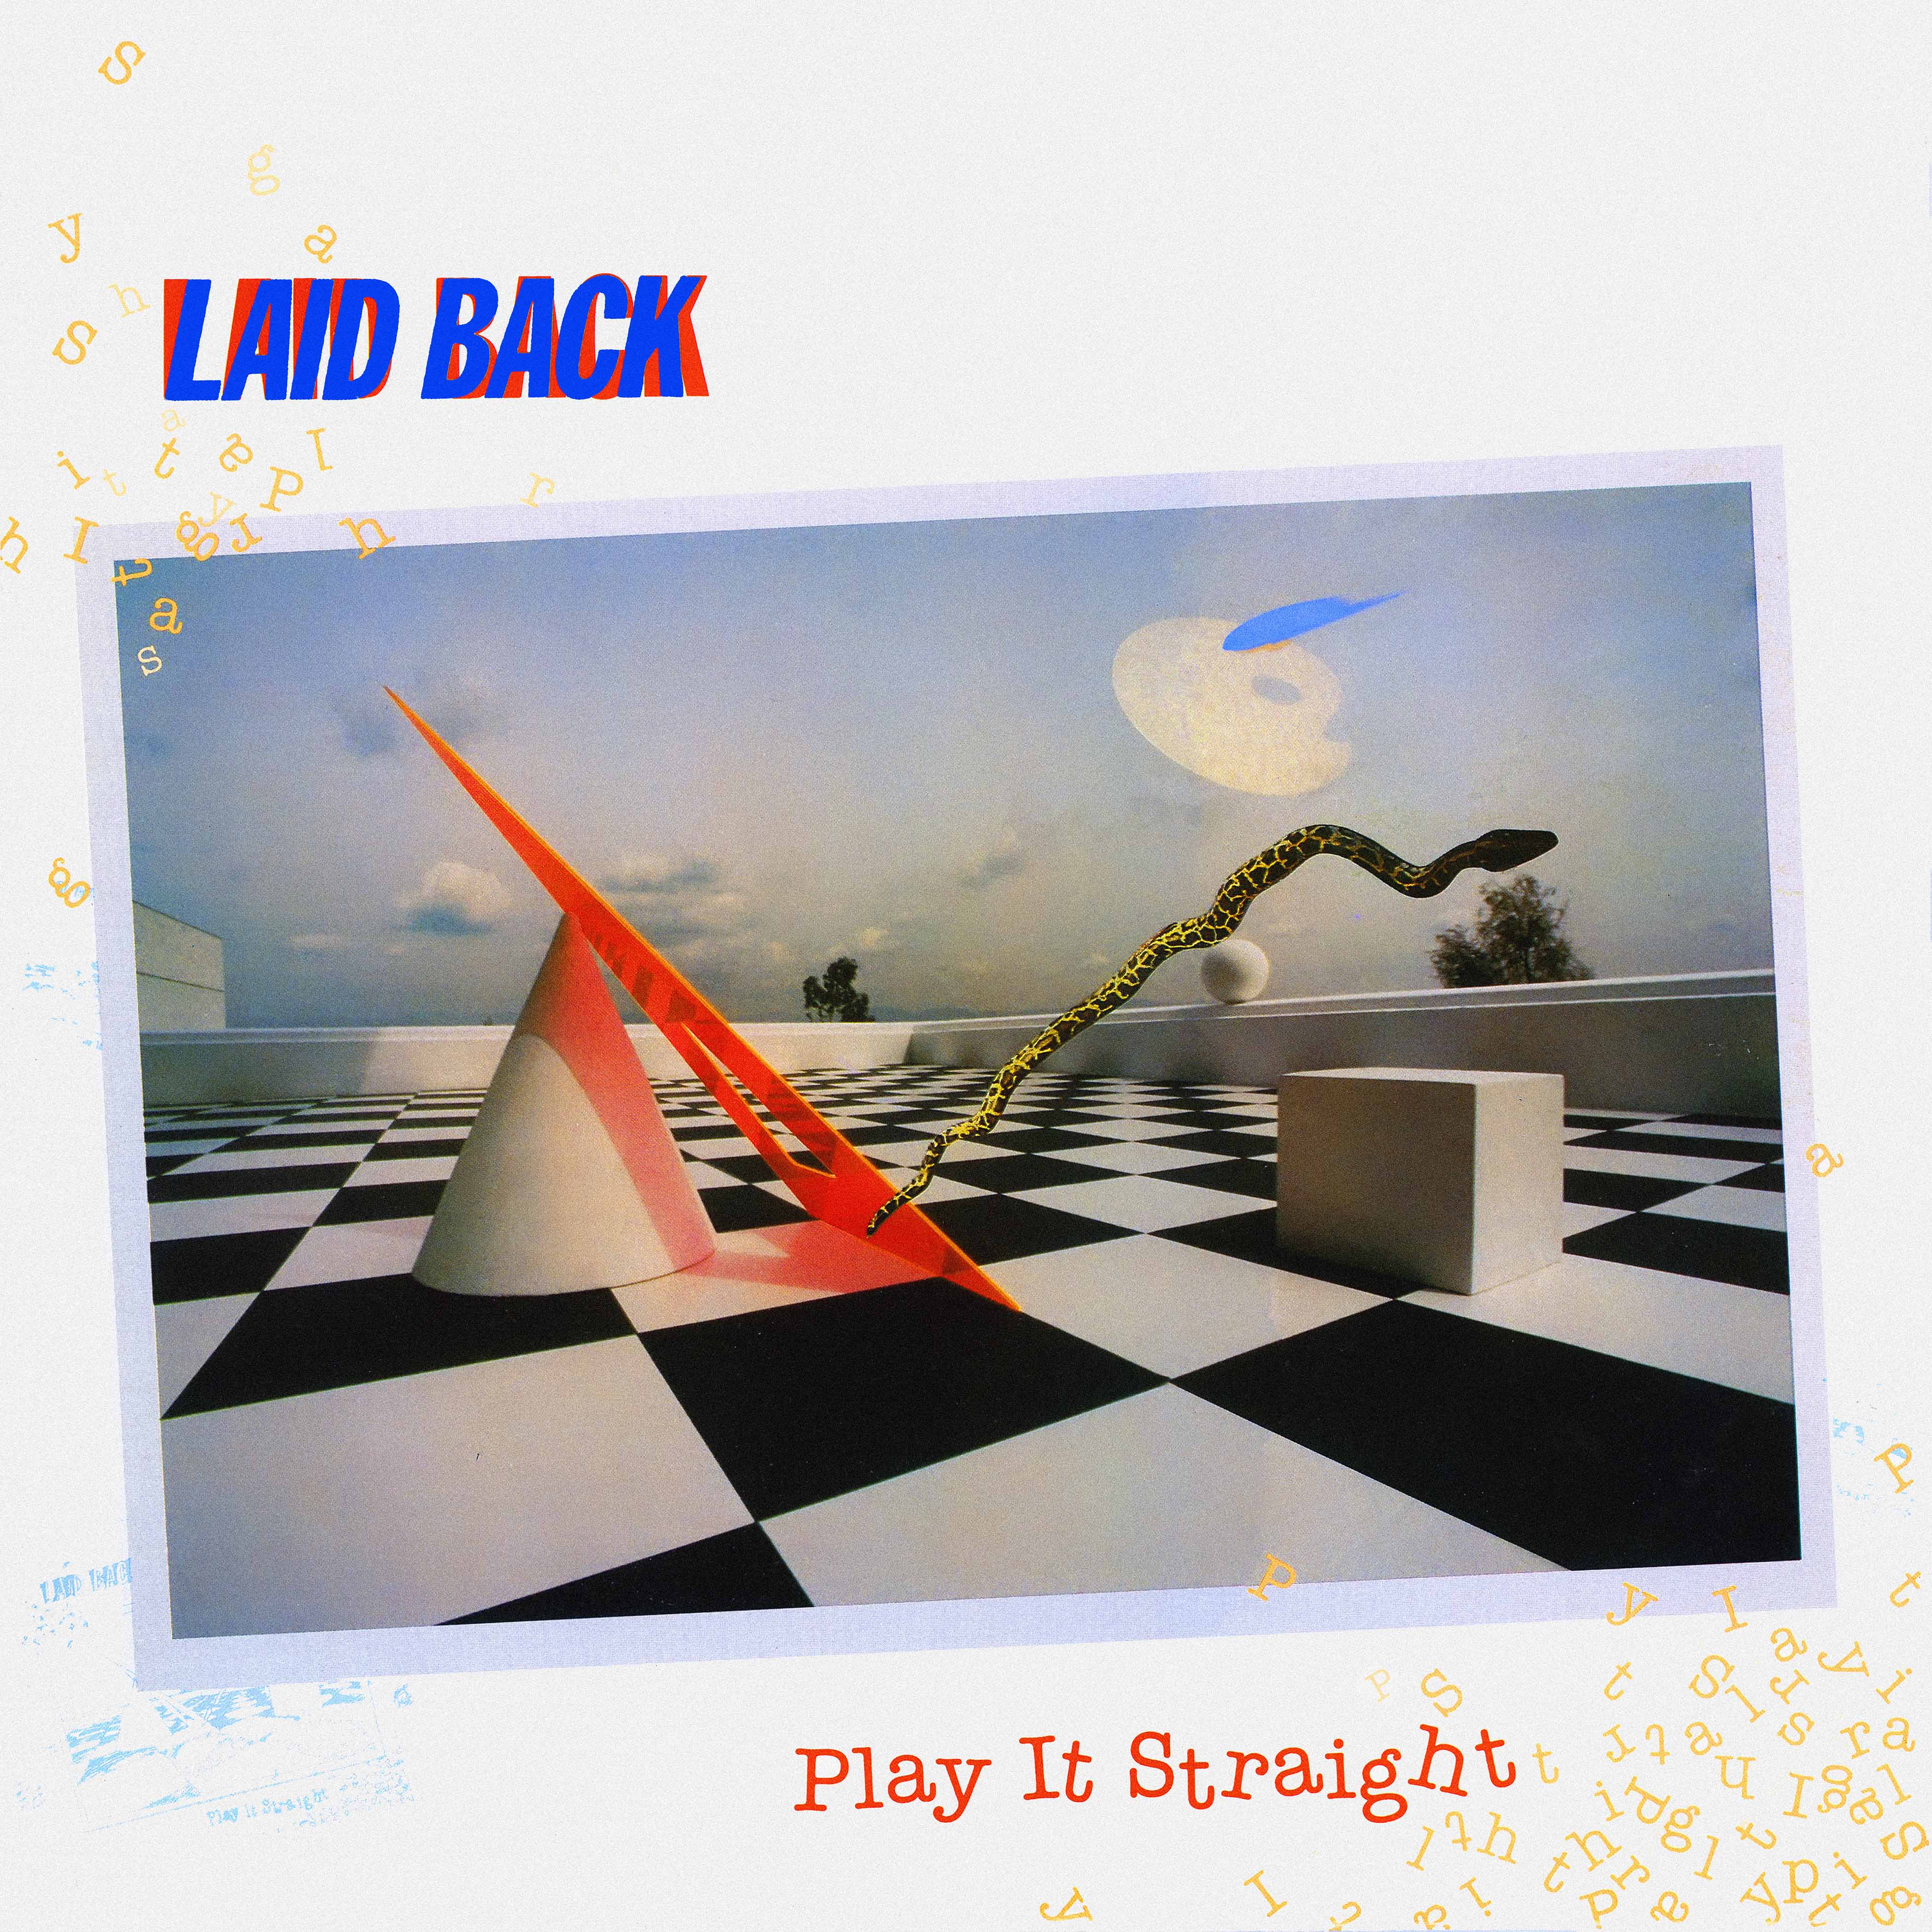 Laid back "Play it straight". Back flac